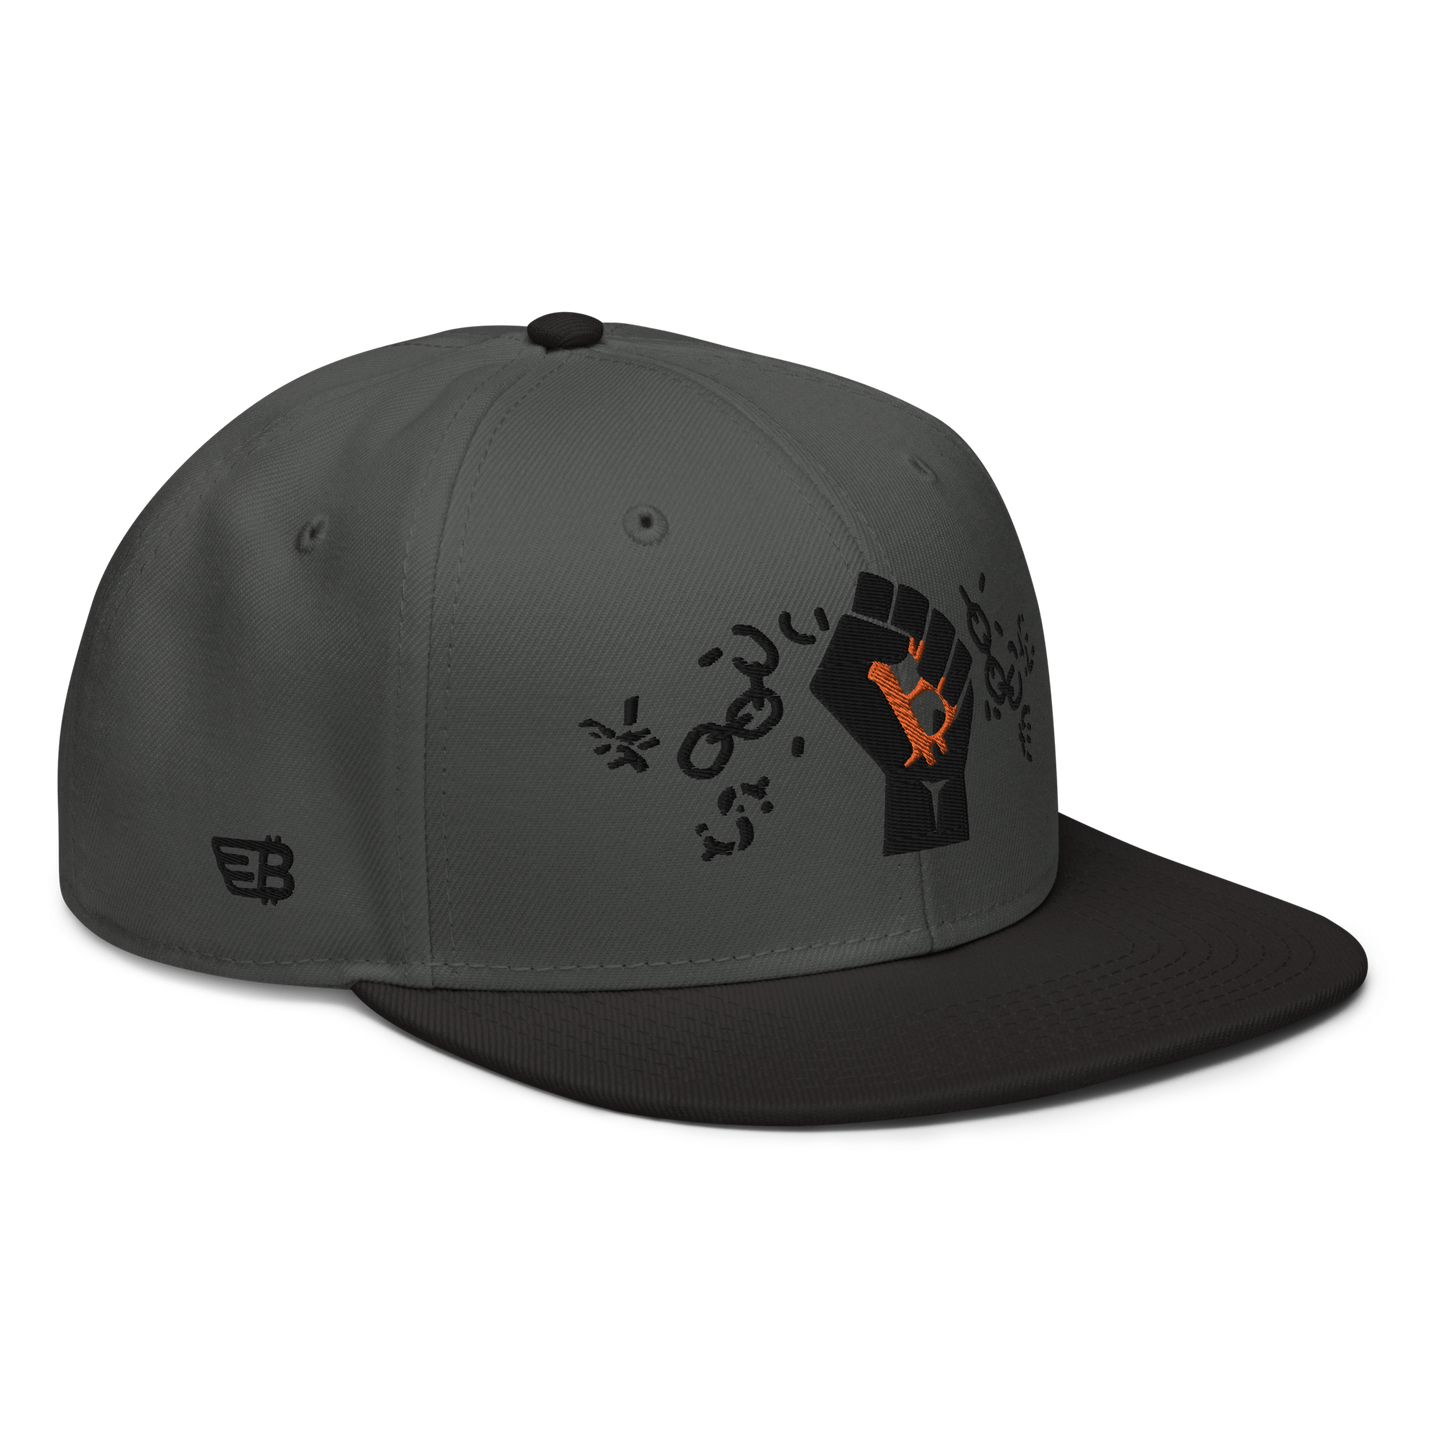 "Chain of fiat" Charcoal gray/Black Snapback Hat